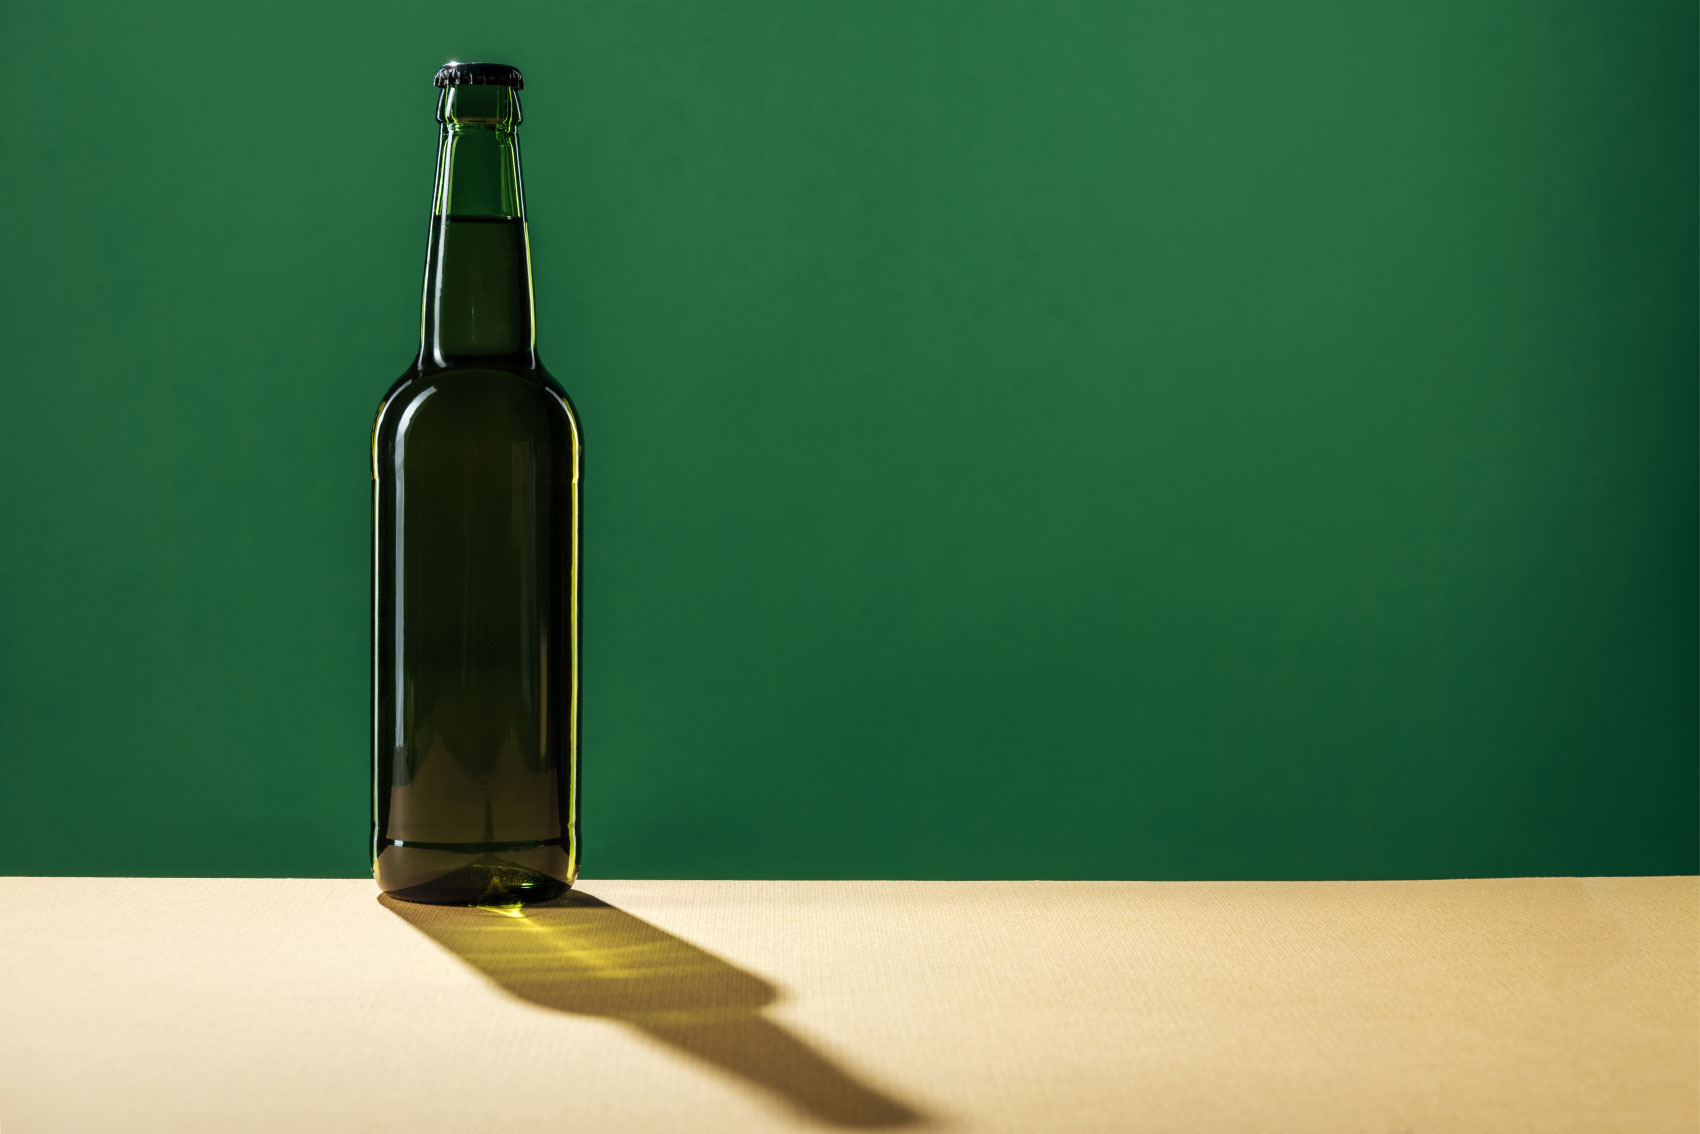 Silhouette of beer bottle casting shadow along table